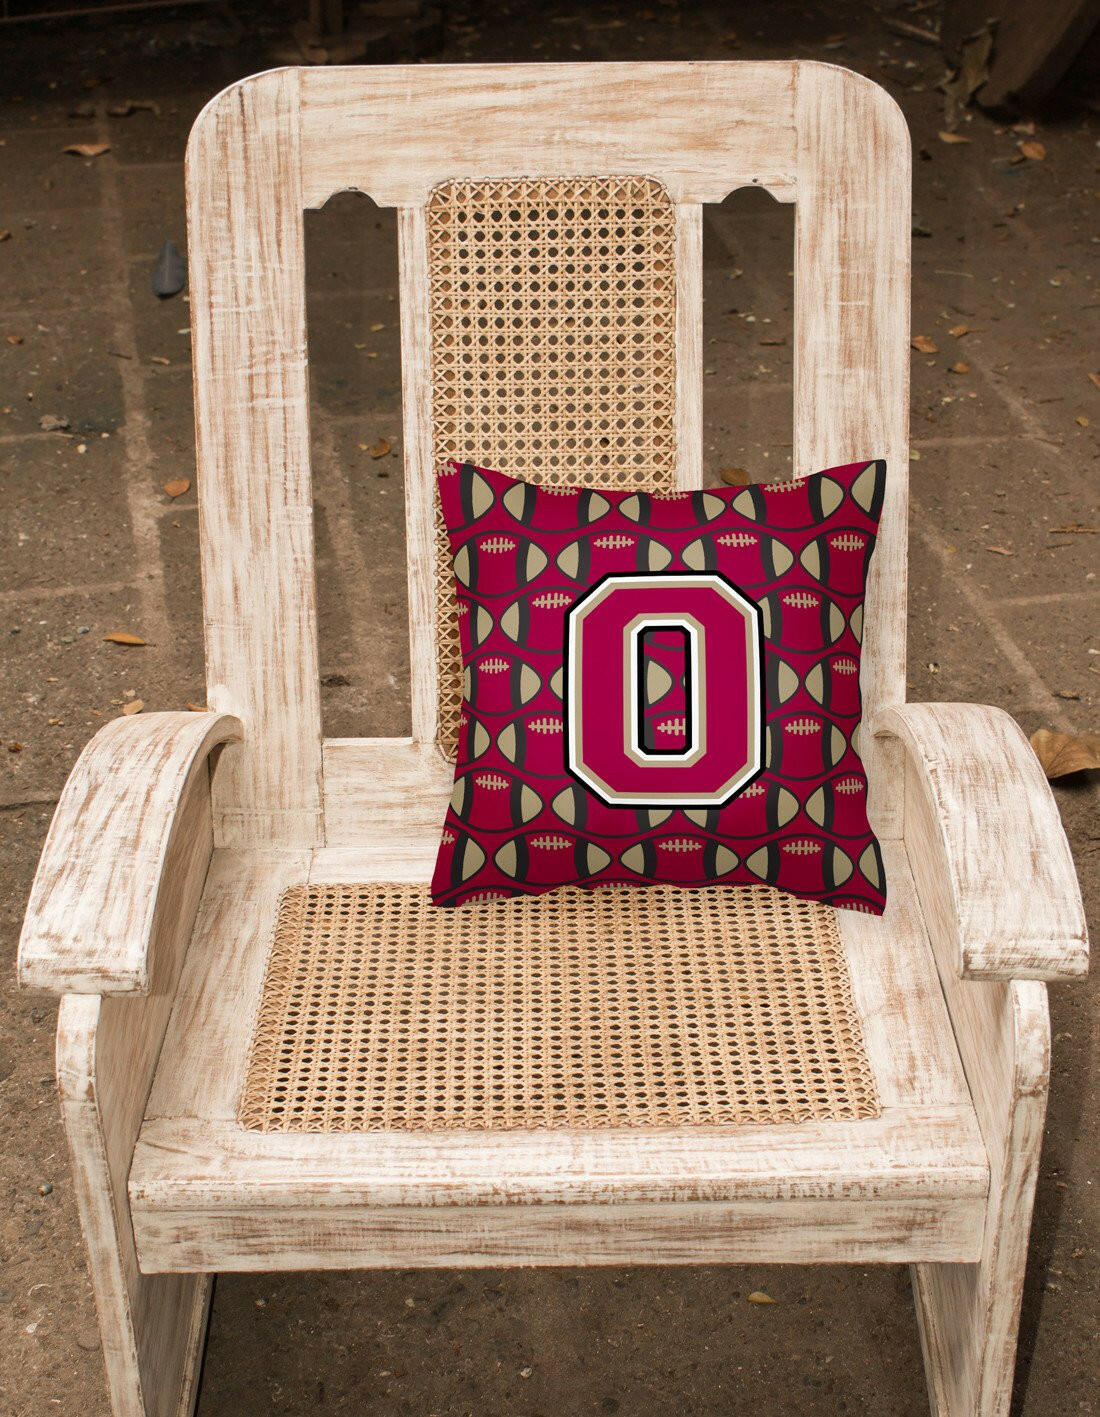 Letter O Football Garnet and Gold Fabric Decorative Pillow CJ1078-OPW1414 by Caroline's Treasures